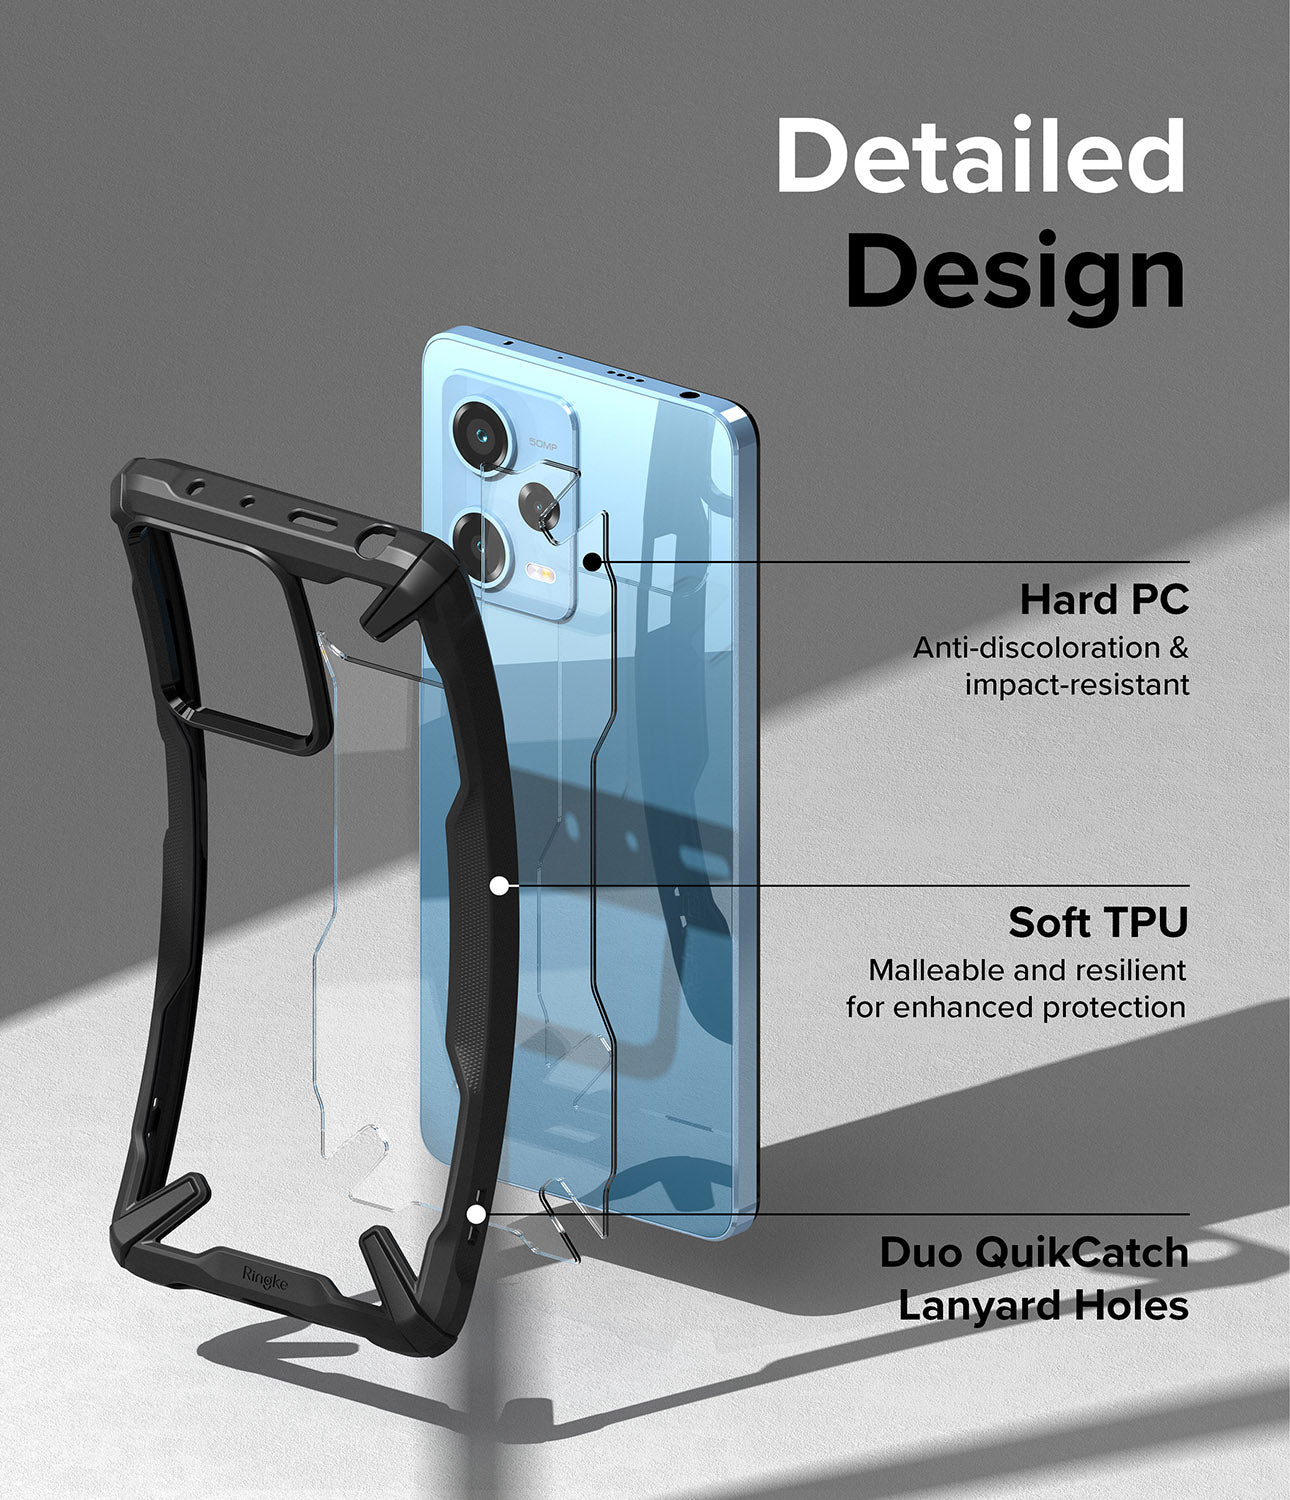 Detailed Design - Hard PC, Soft TPU, and Dui QuikCatch Lanyard Holes